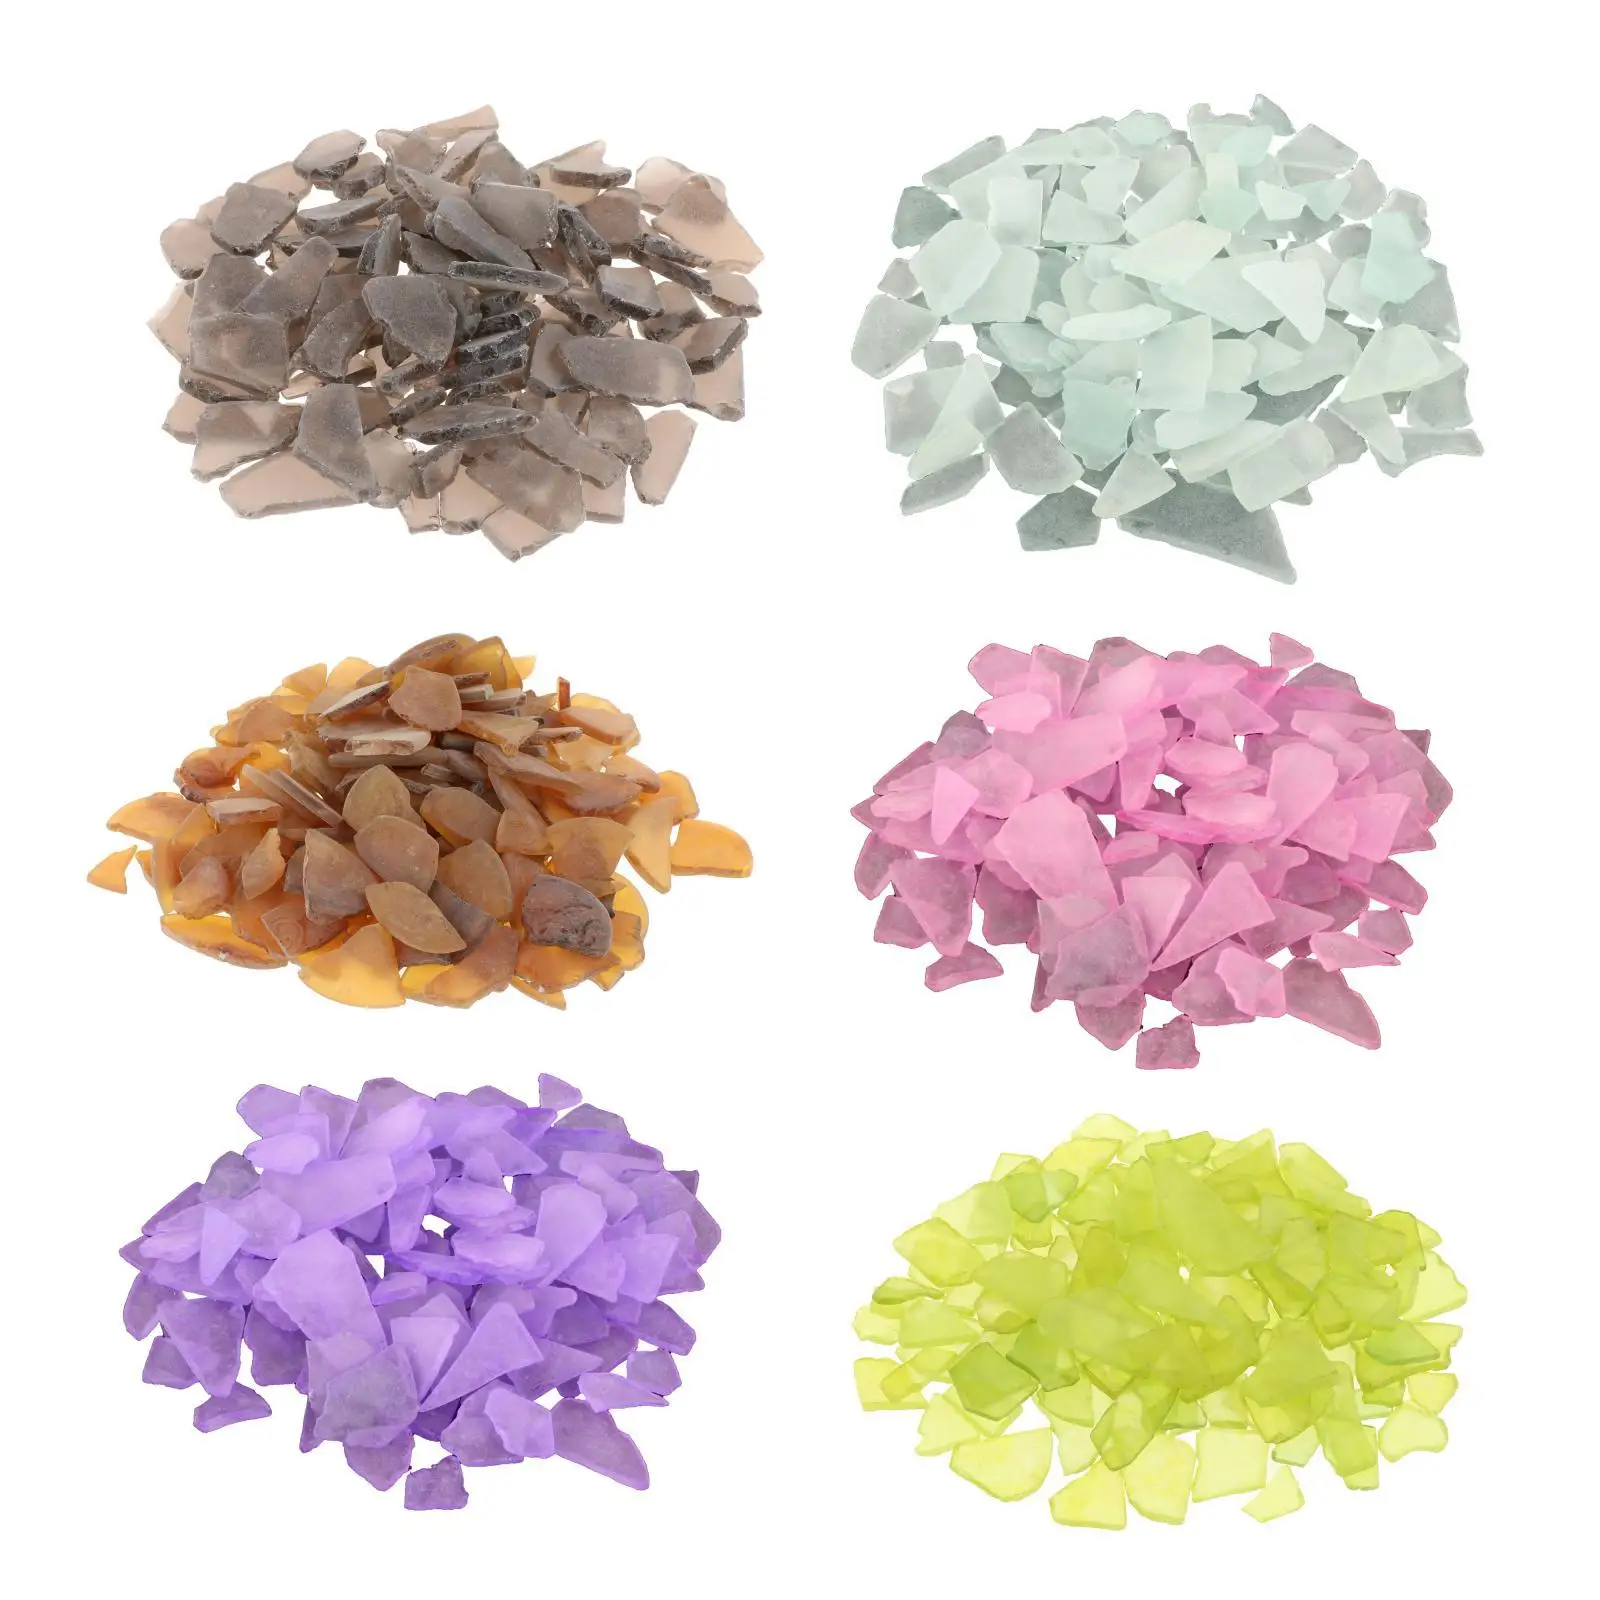 500G Sea Beach Glass DIY Crafts Pieces Flat for Wedding Party Home